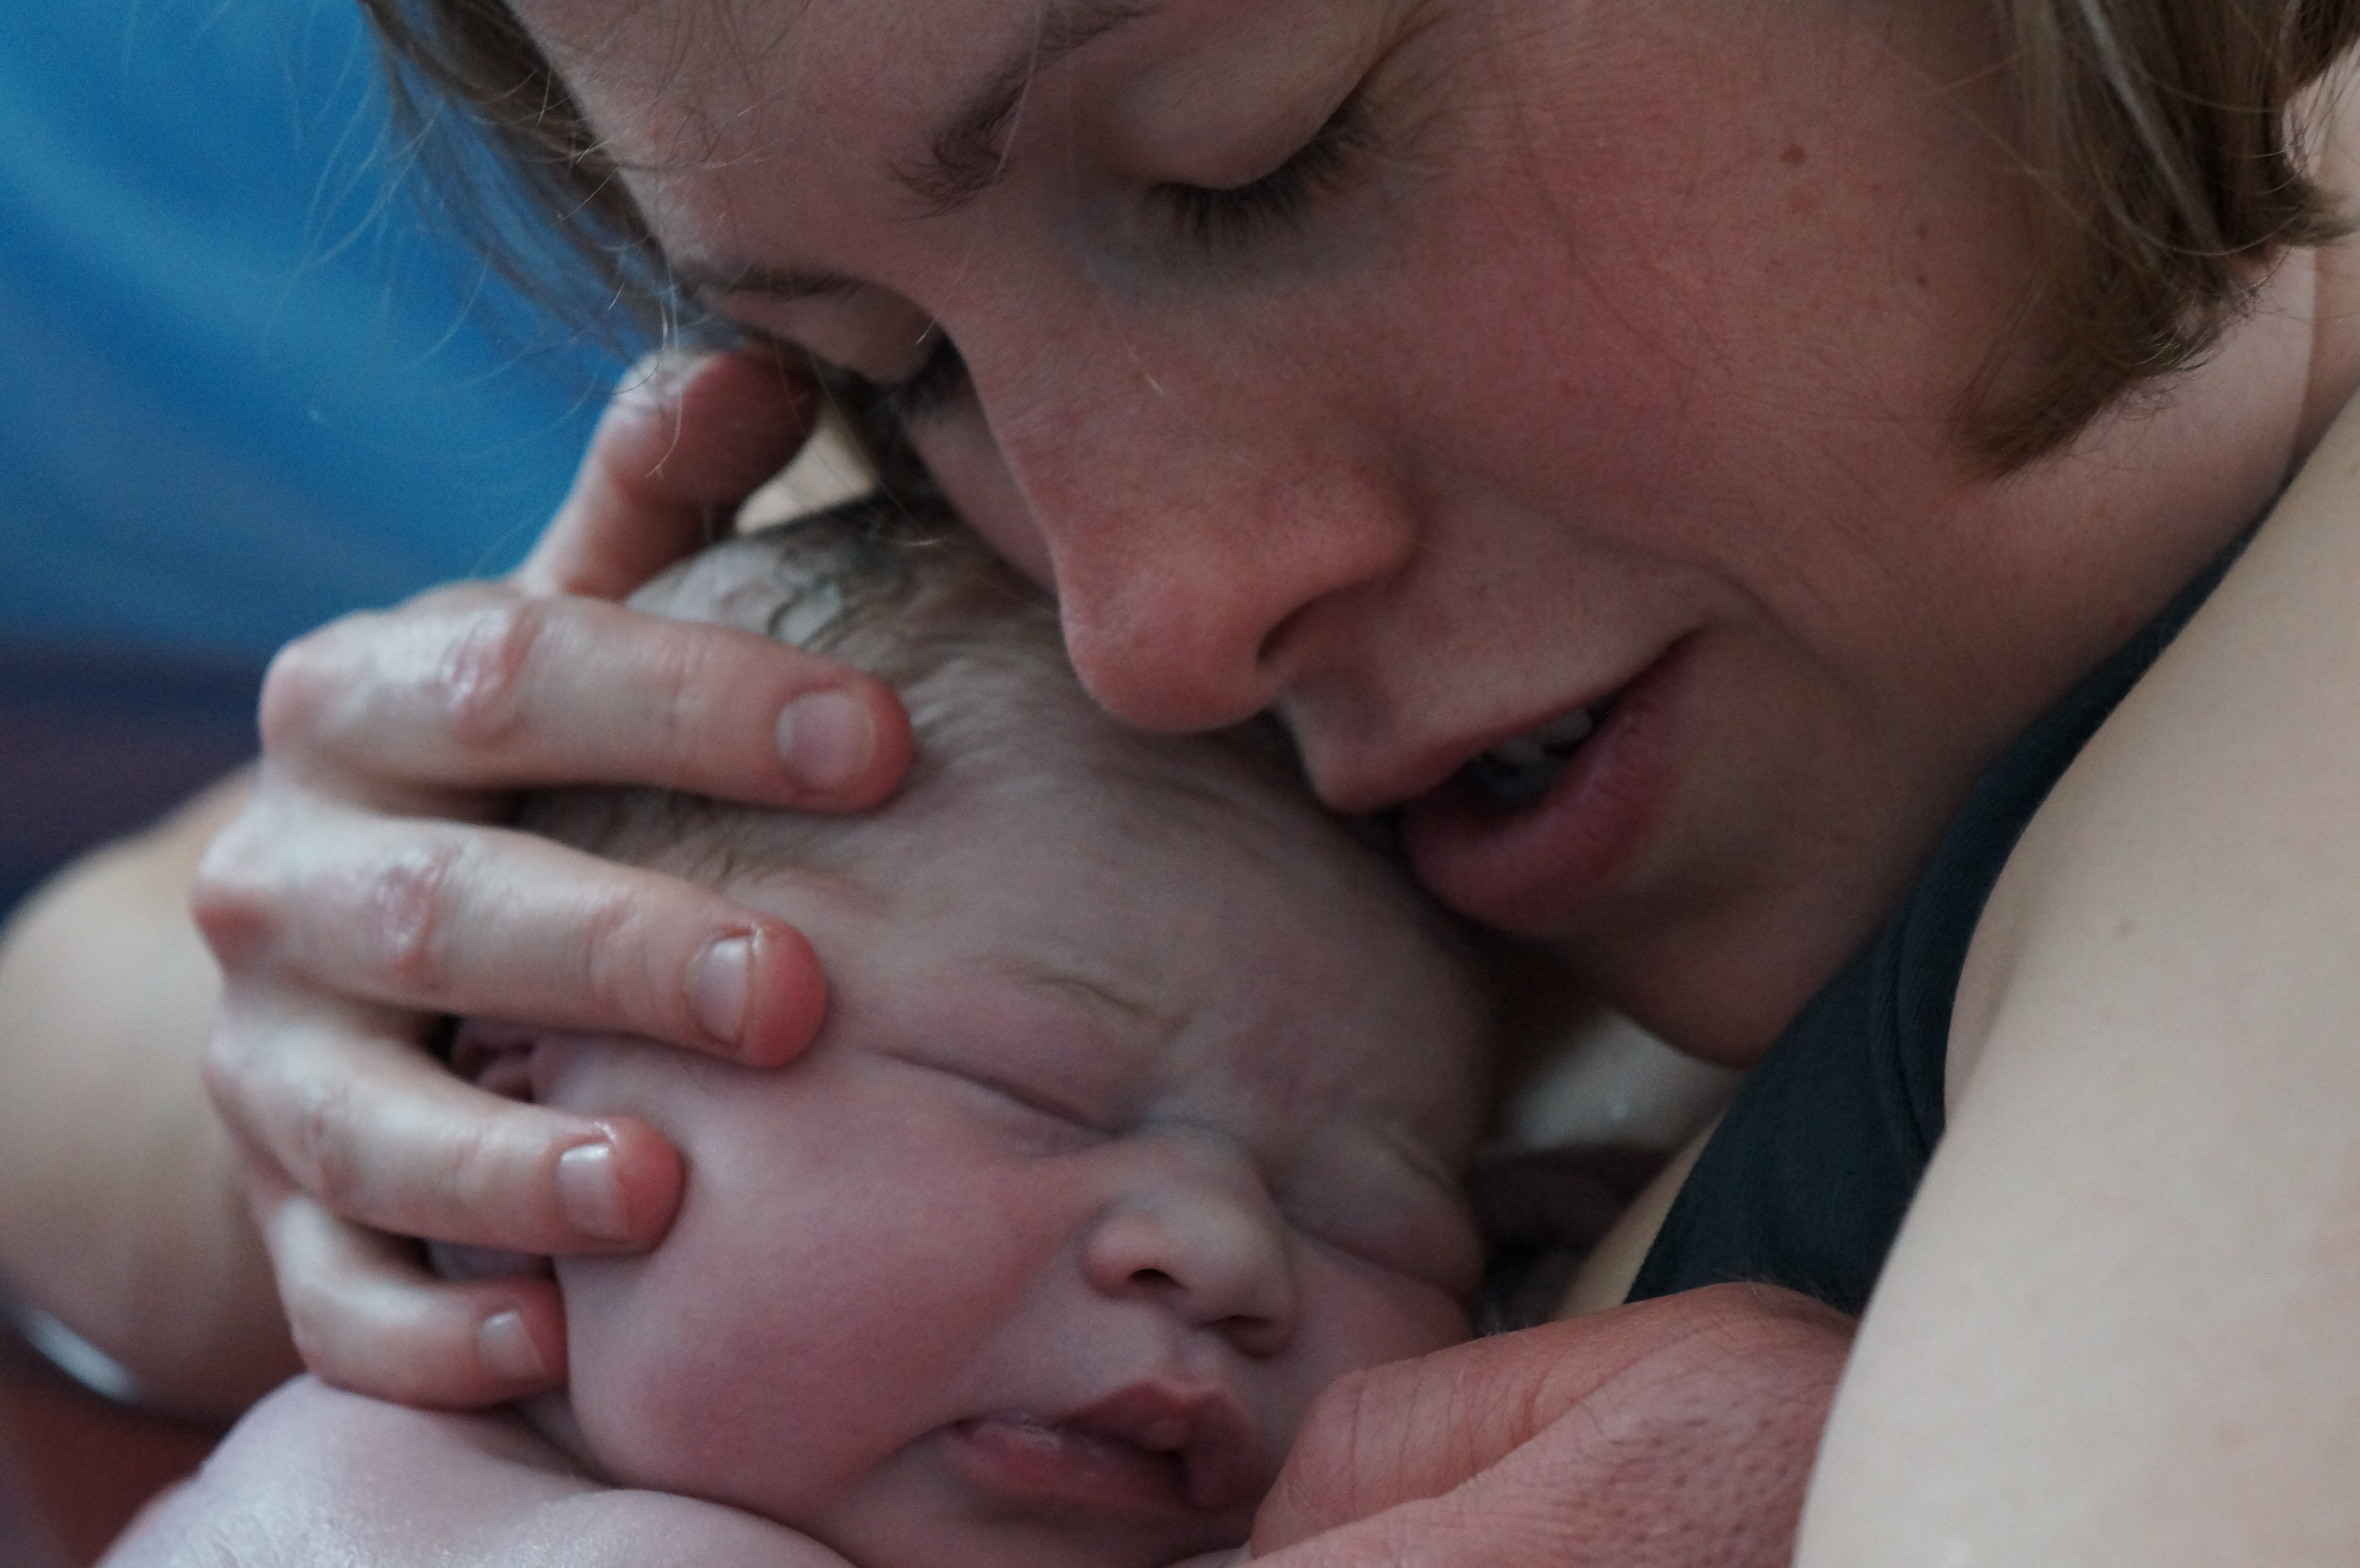 Midwife shares benefits, risks of water birth